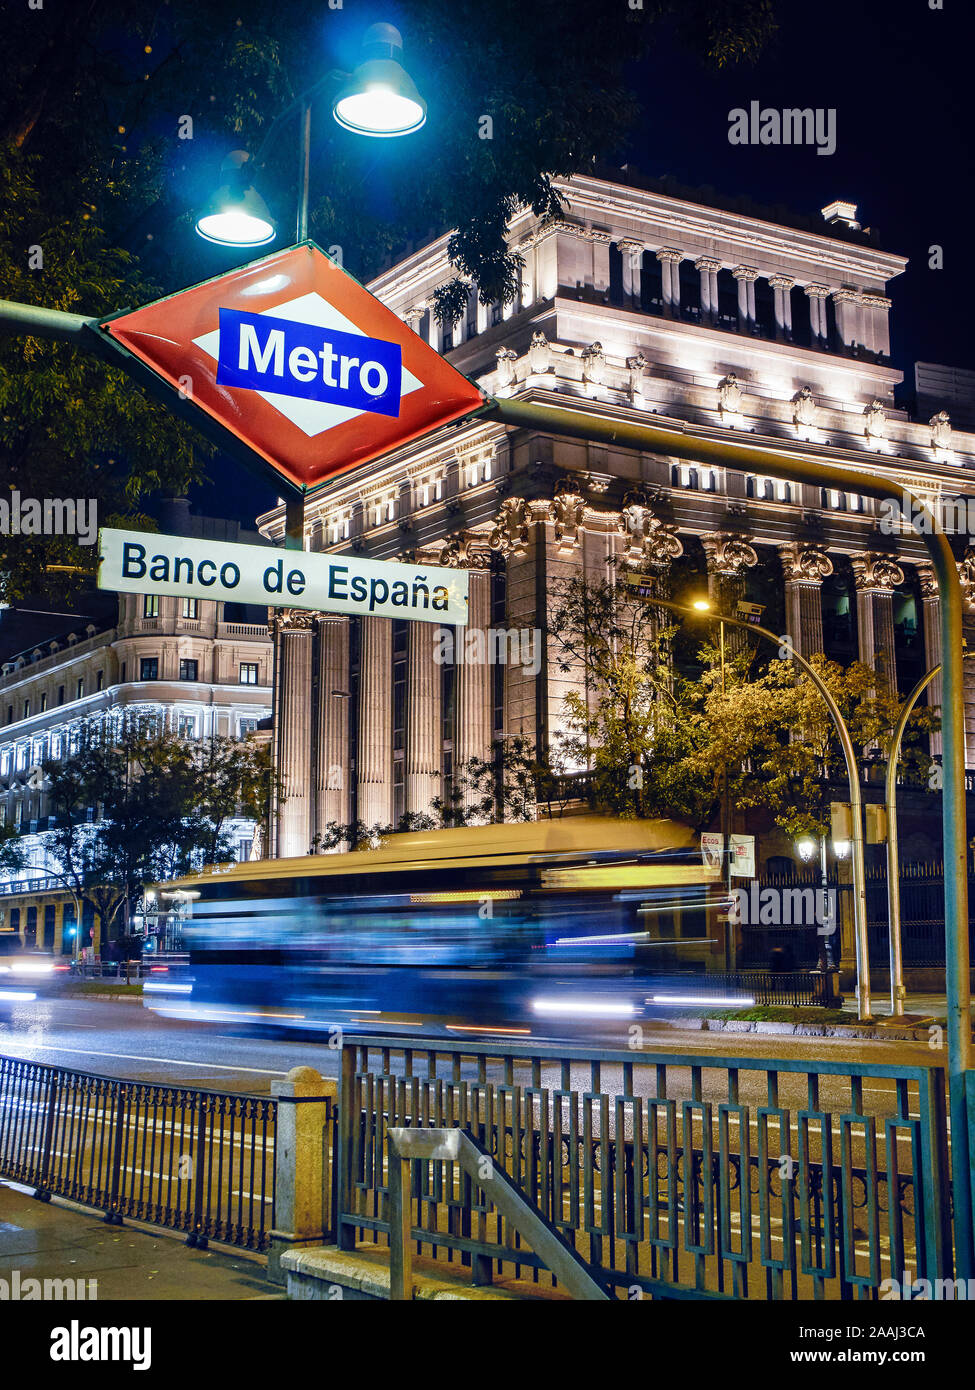 Banco de Espana Metro station signboard at nightfall with The Cervantes Institute building in the background. Madrid, Spain. Stock Photo